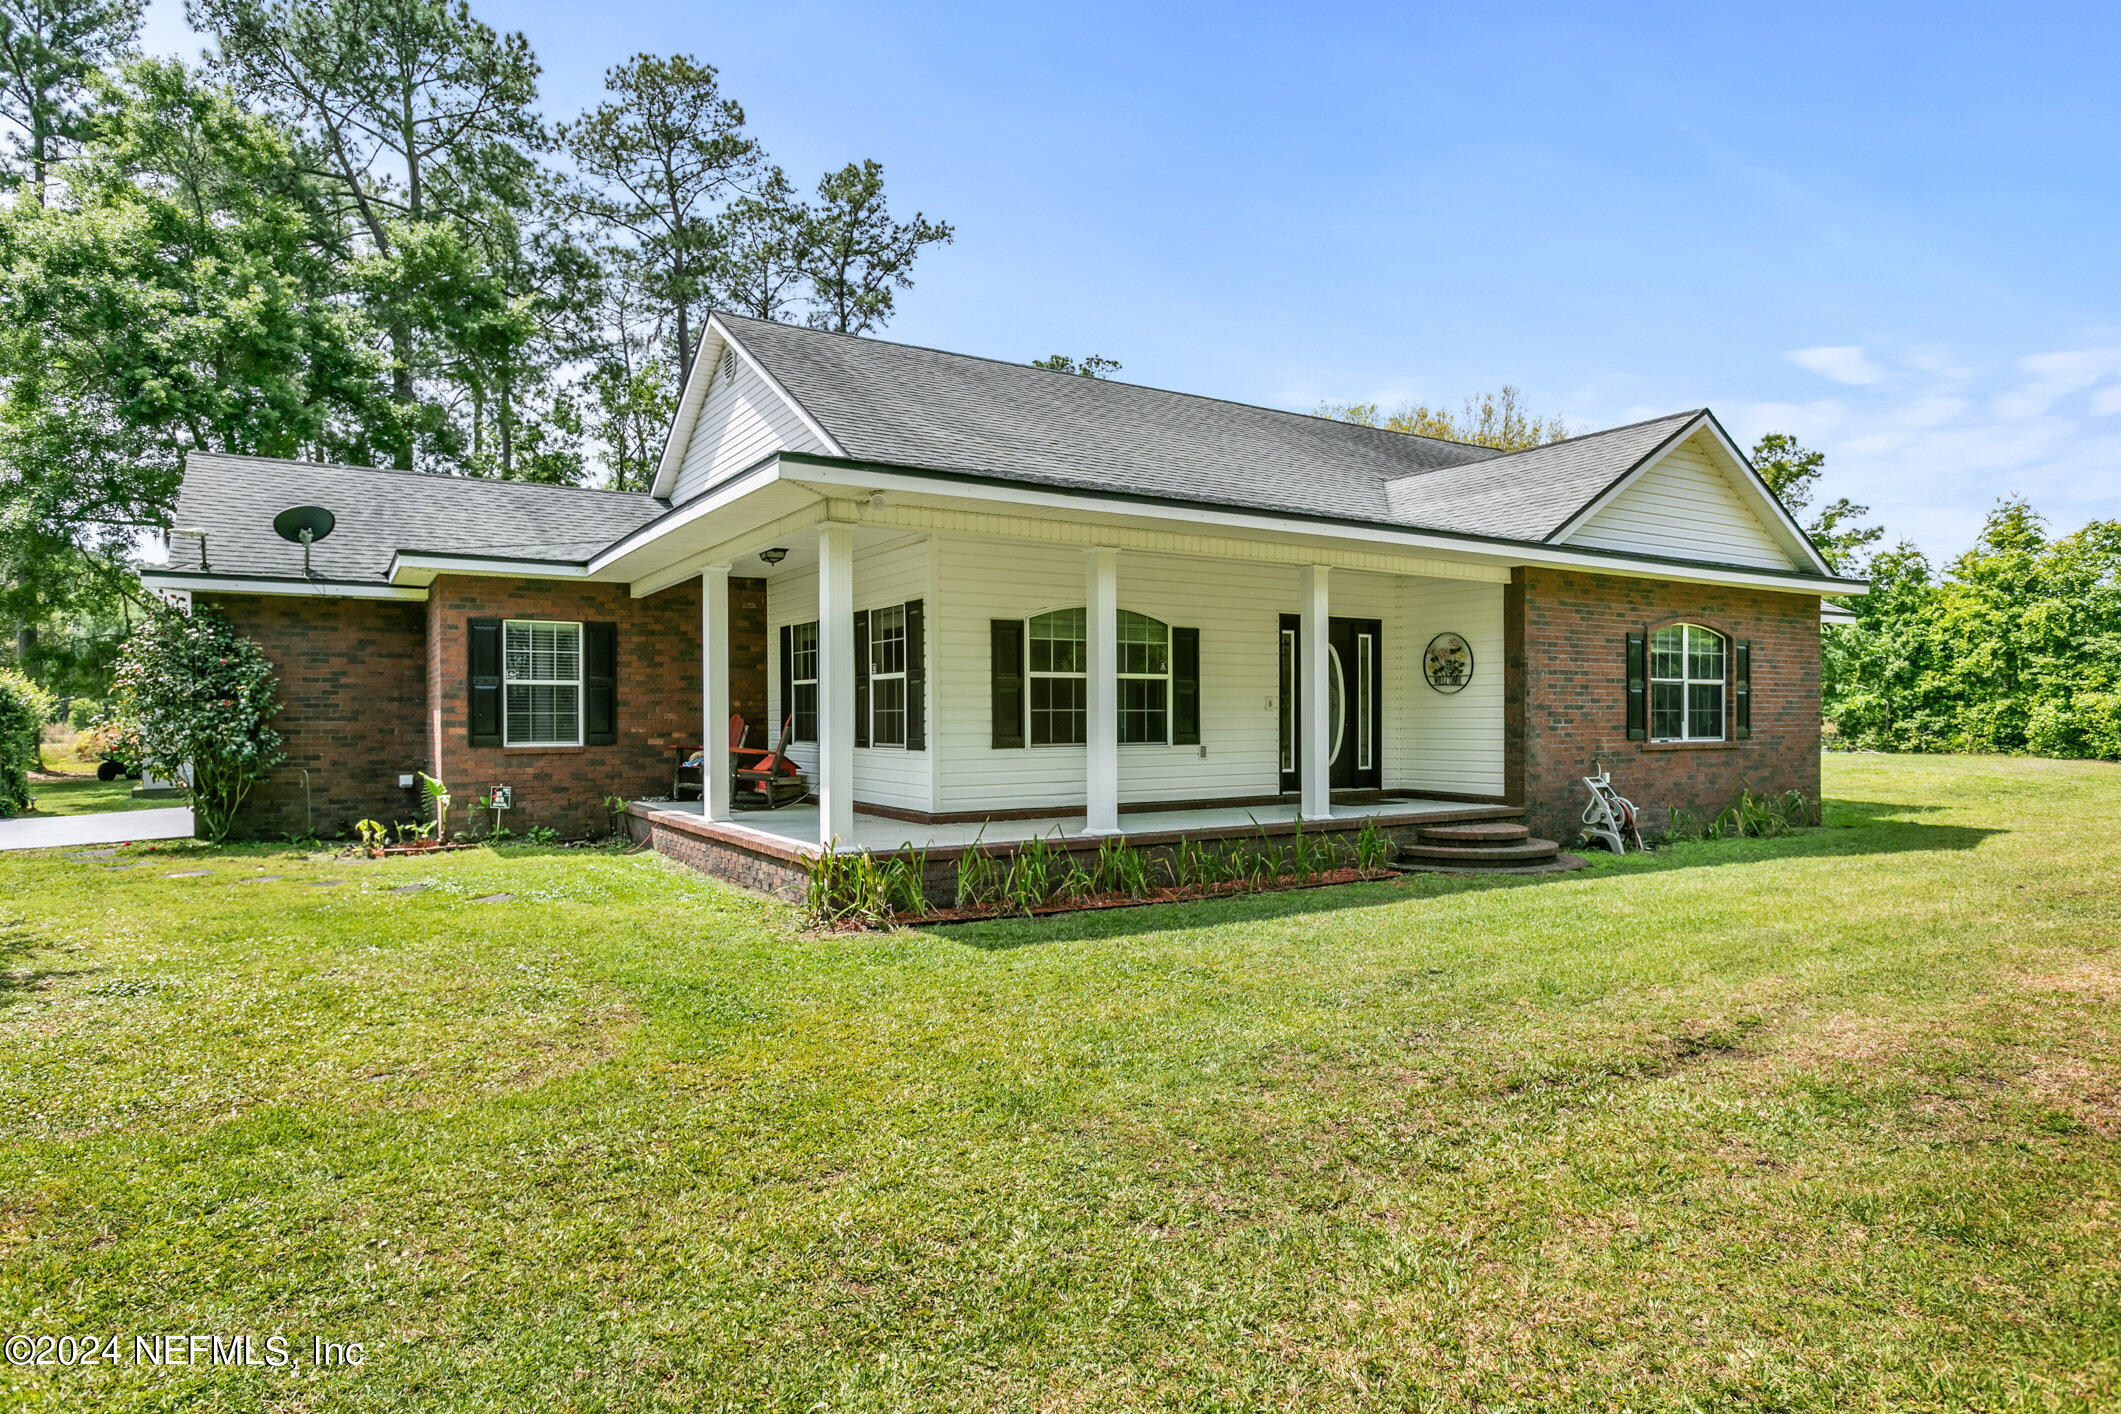 Bryceville, FL home for sale located at 585 Whoa Ln Lane, Bryceville, FL 32009